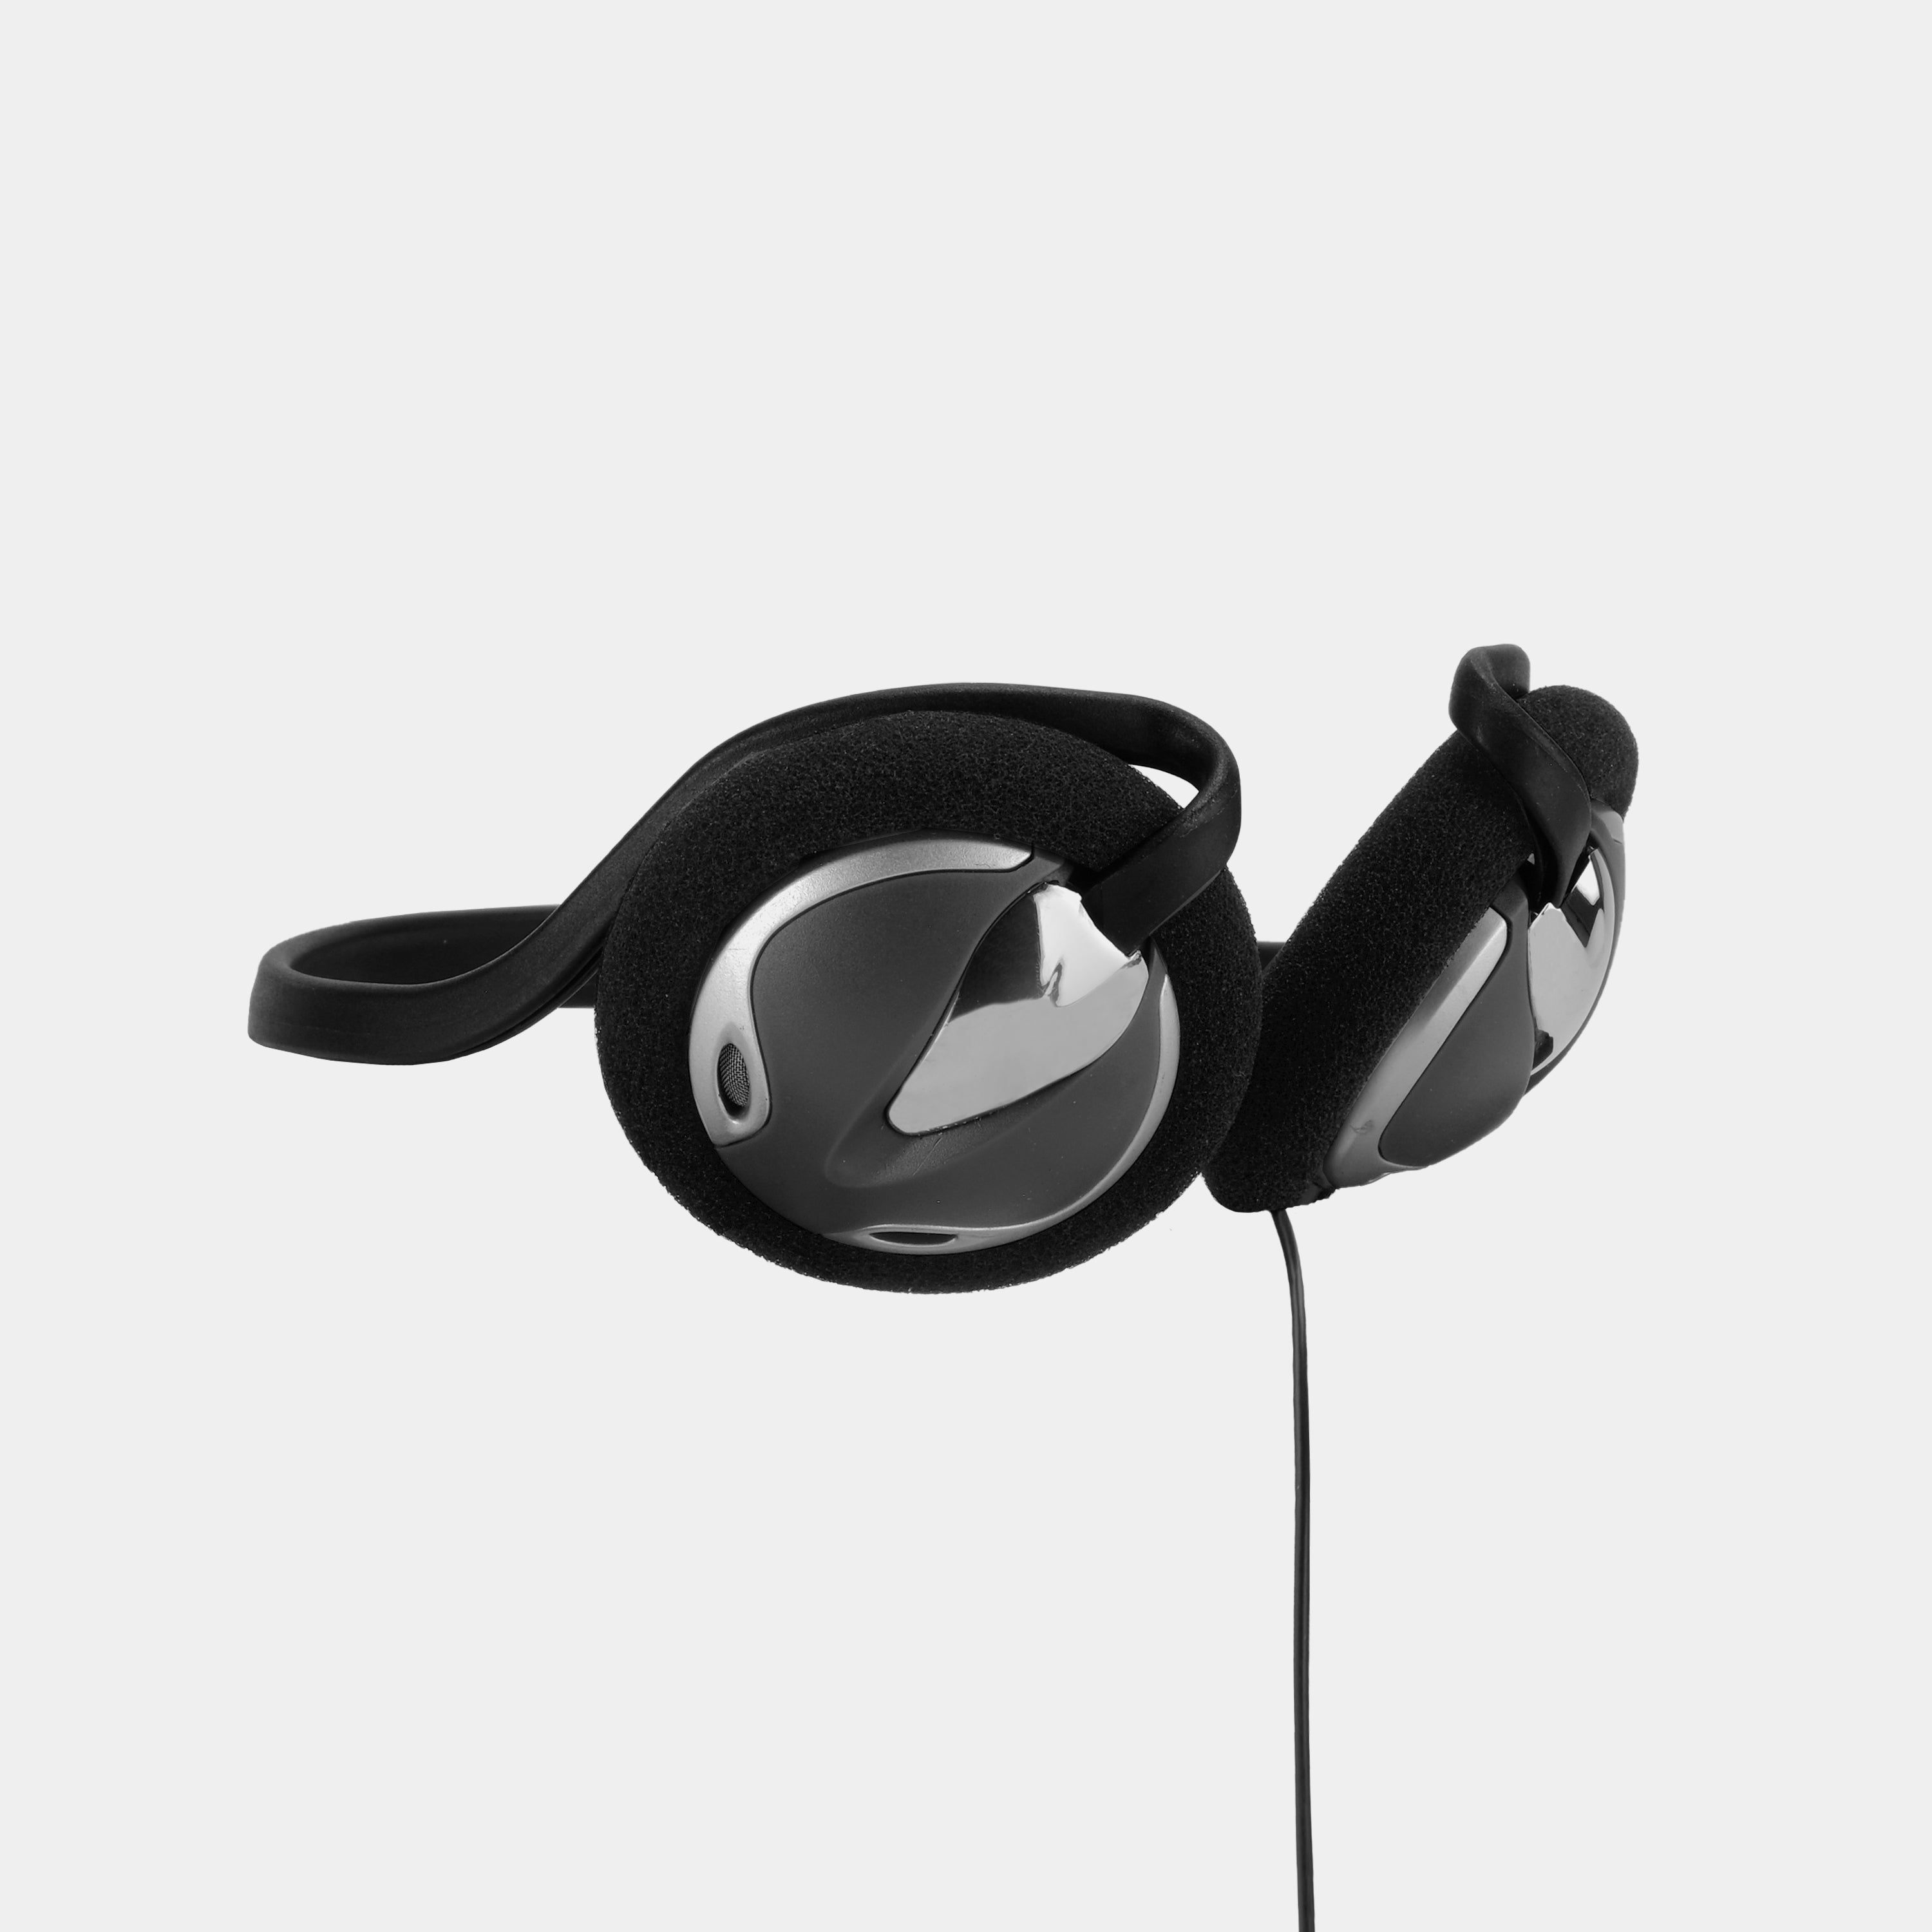 Black and Silver Neckband Headphones